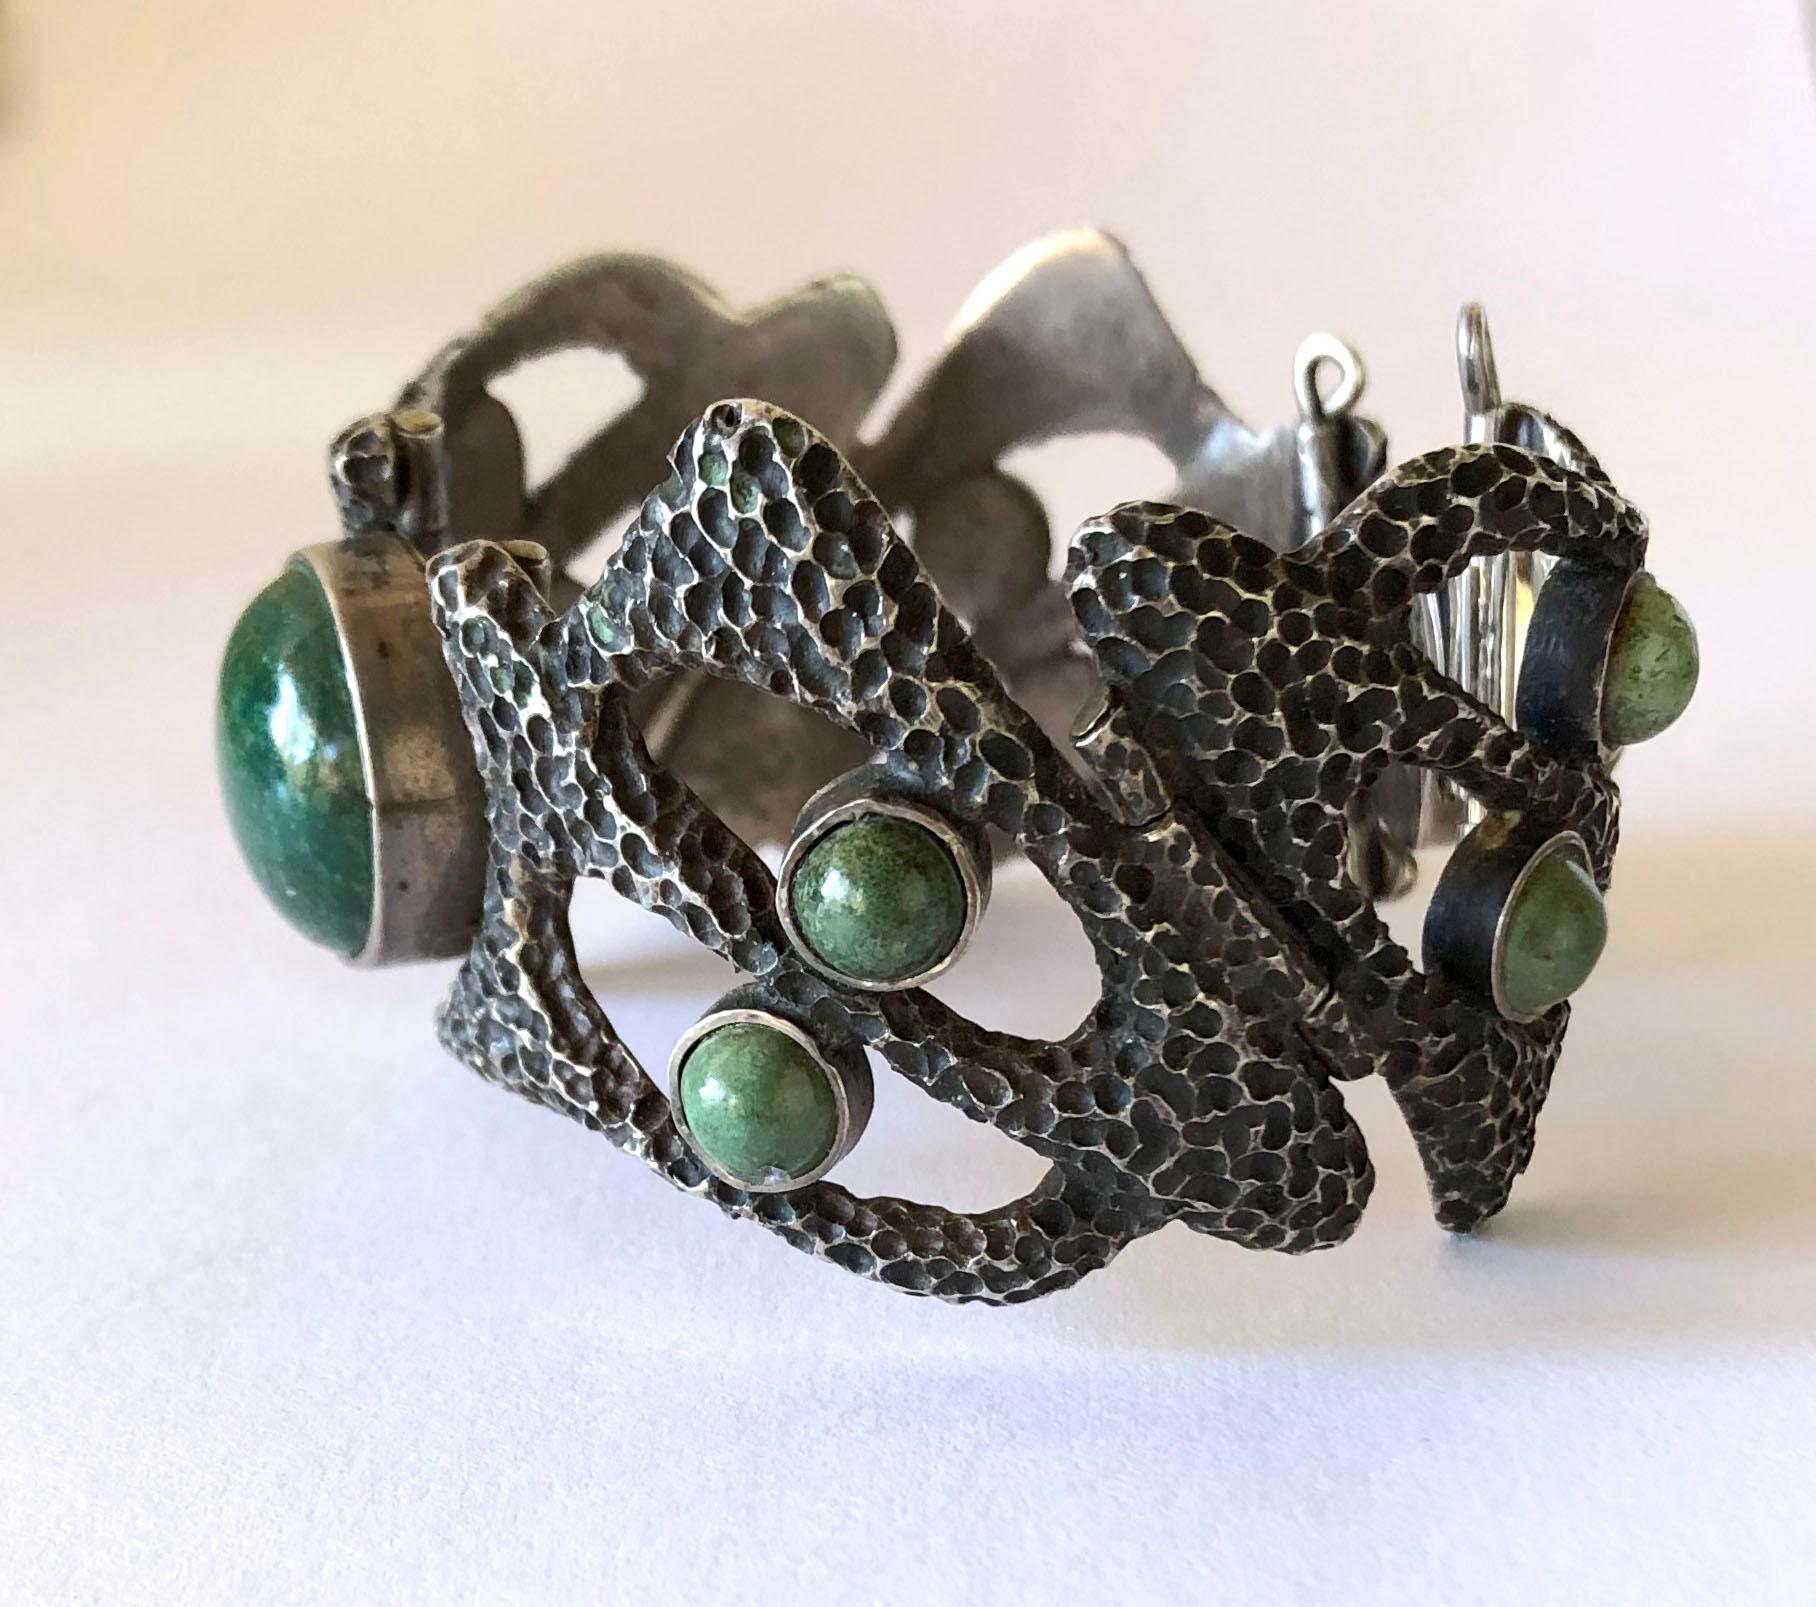 Heavily textured sterling silver and with natural gemstones bracelet created by Erika Hult de Corral of Puerto Vallarta, Mexico. Bracelet has a wearable wrist measurement of 6.5